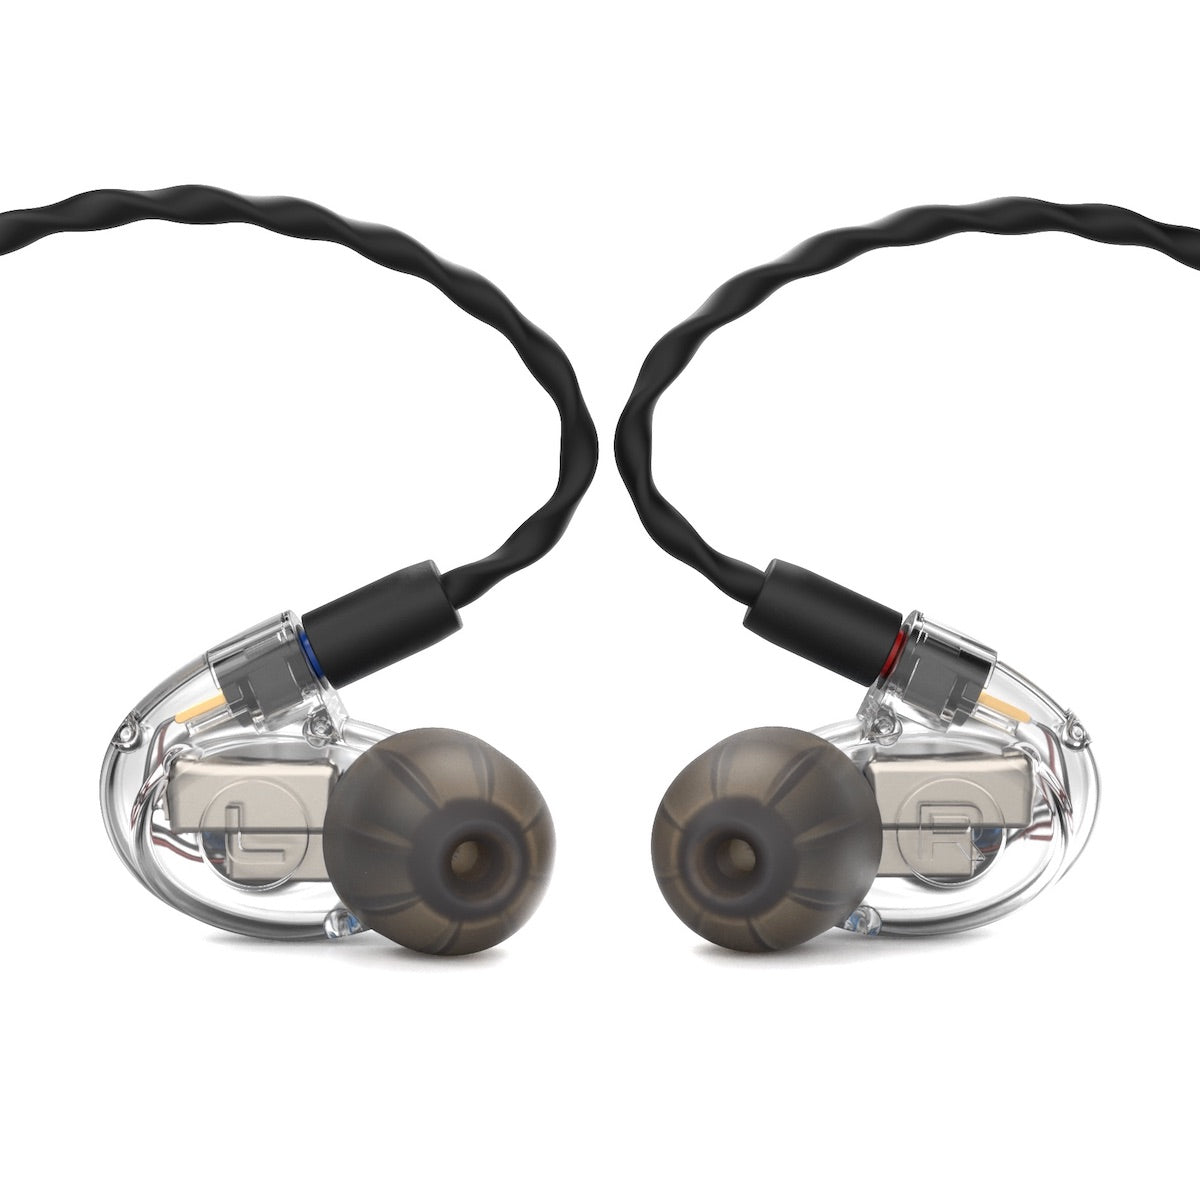 Westone AM Pro X20 - Dual-Driver Musician IEM with Passive Ambience, rear